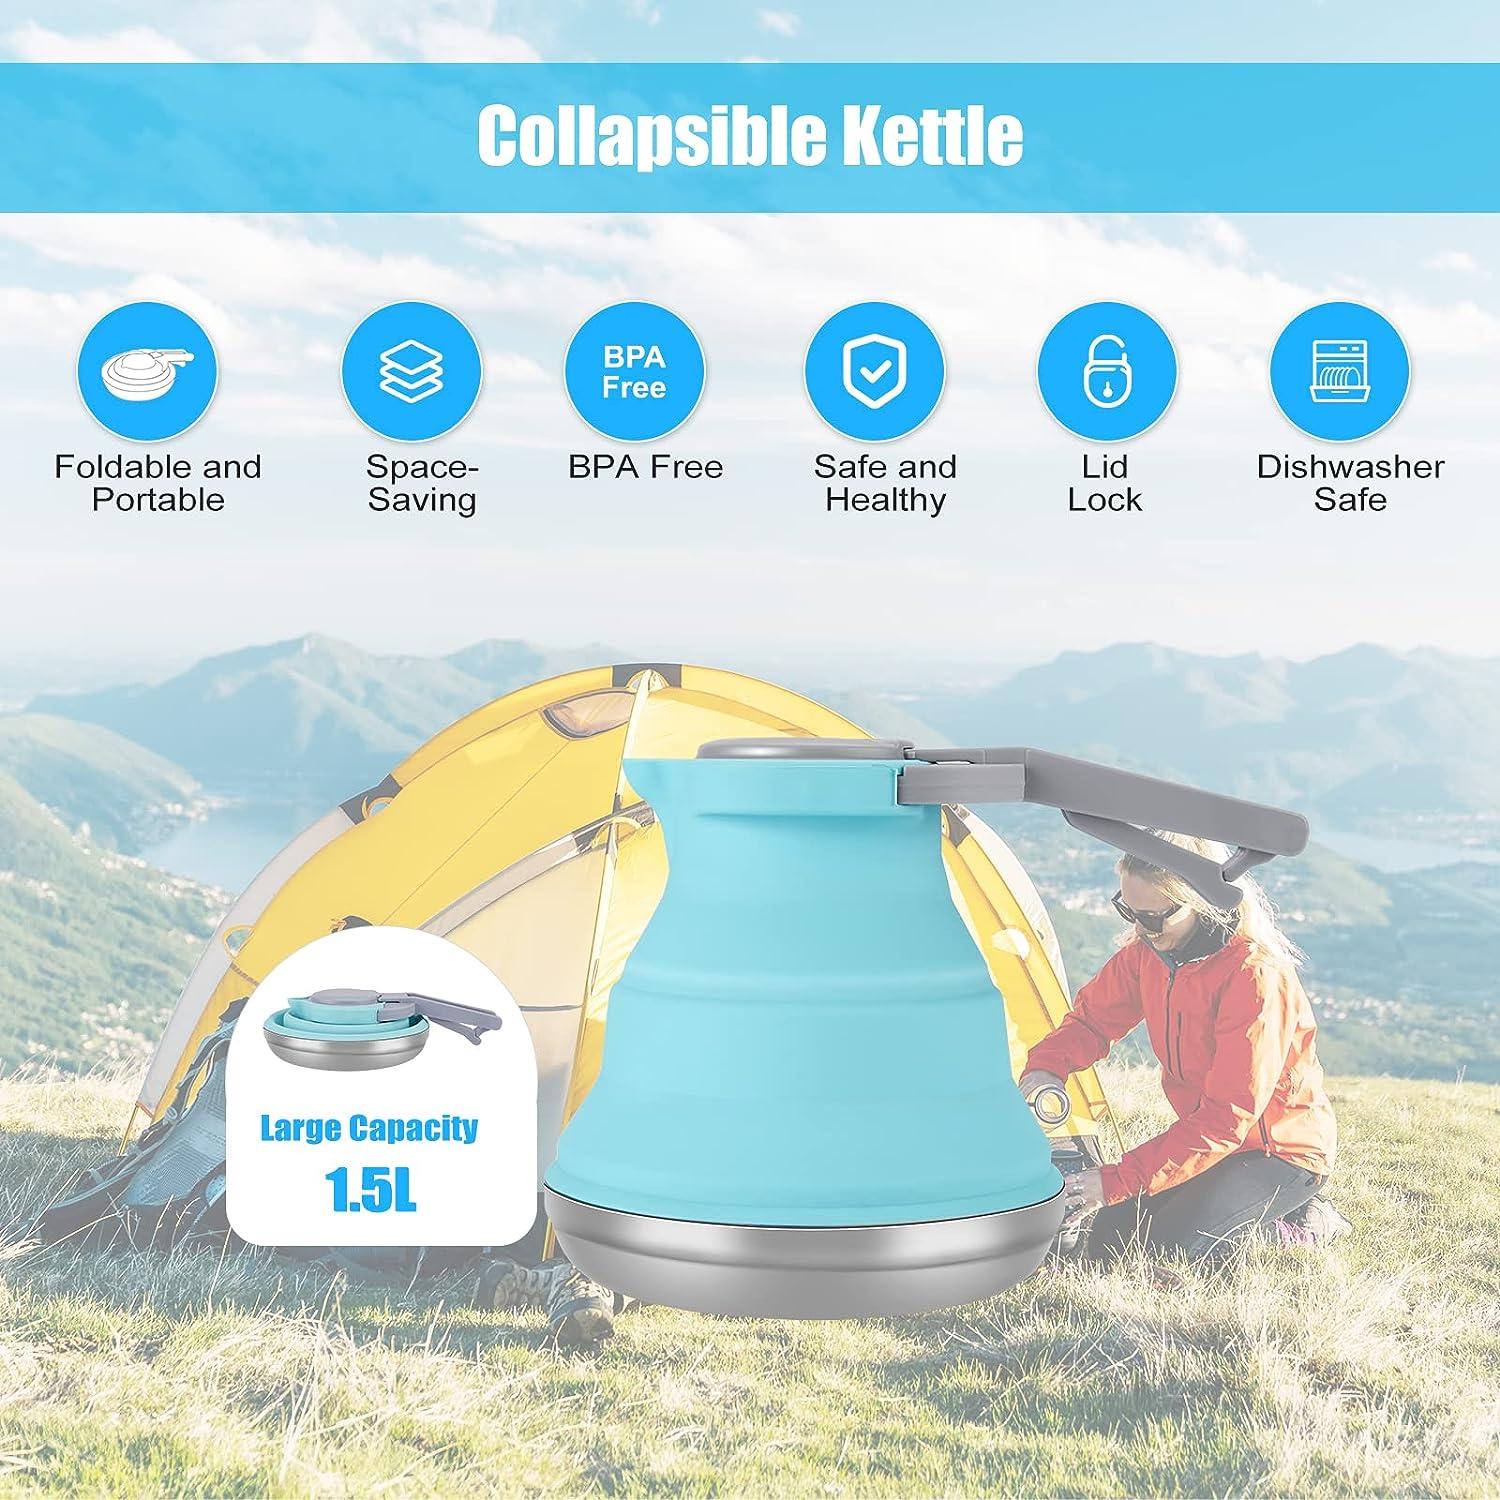 Portable Foldable Kettle And Cup - ApolloBox